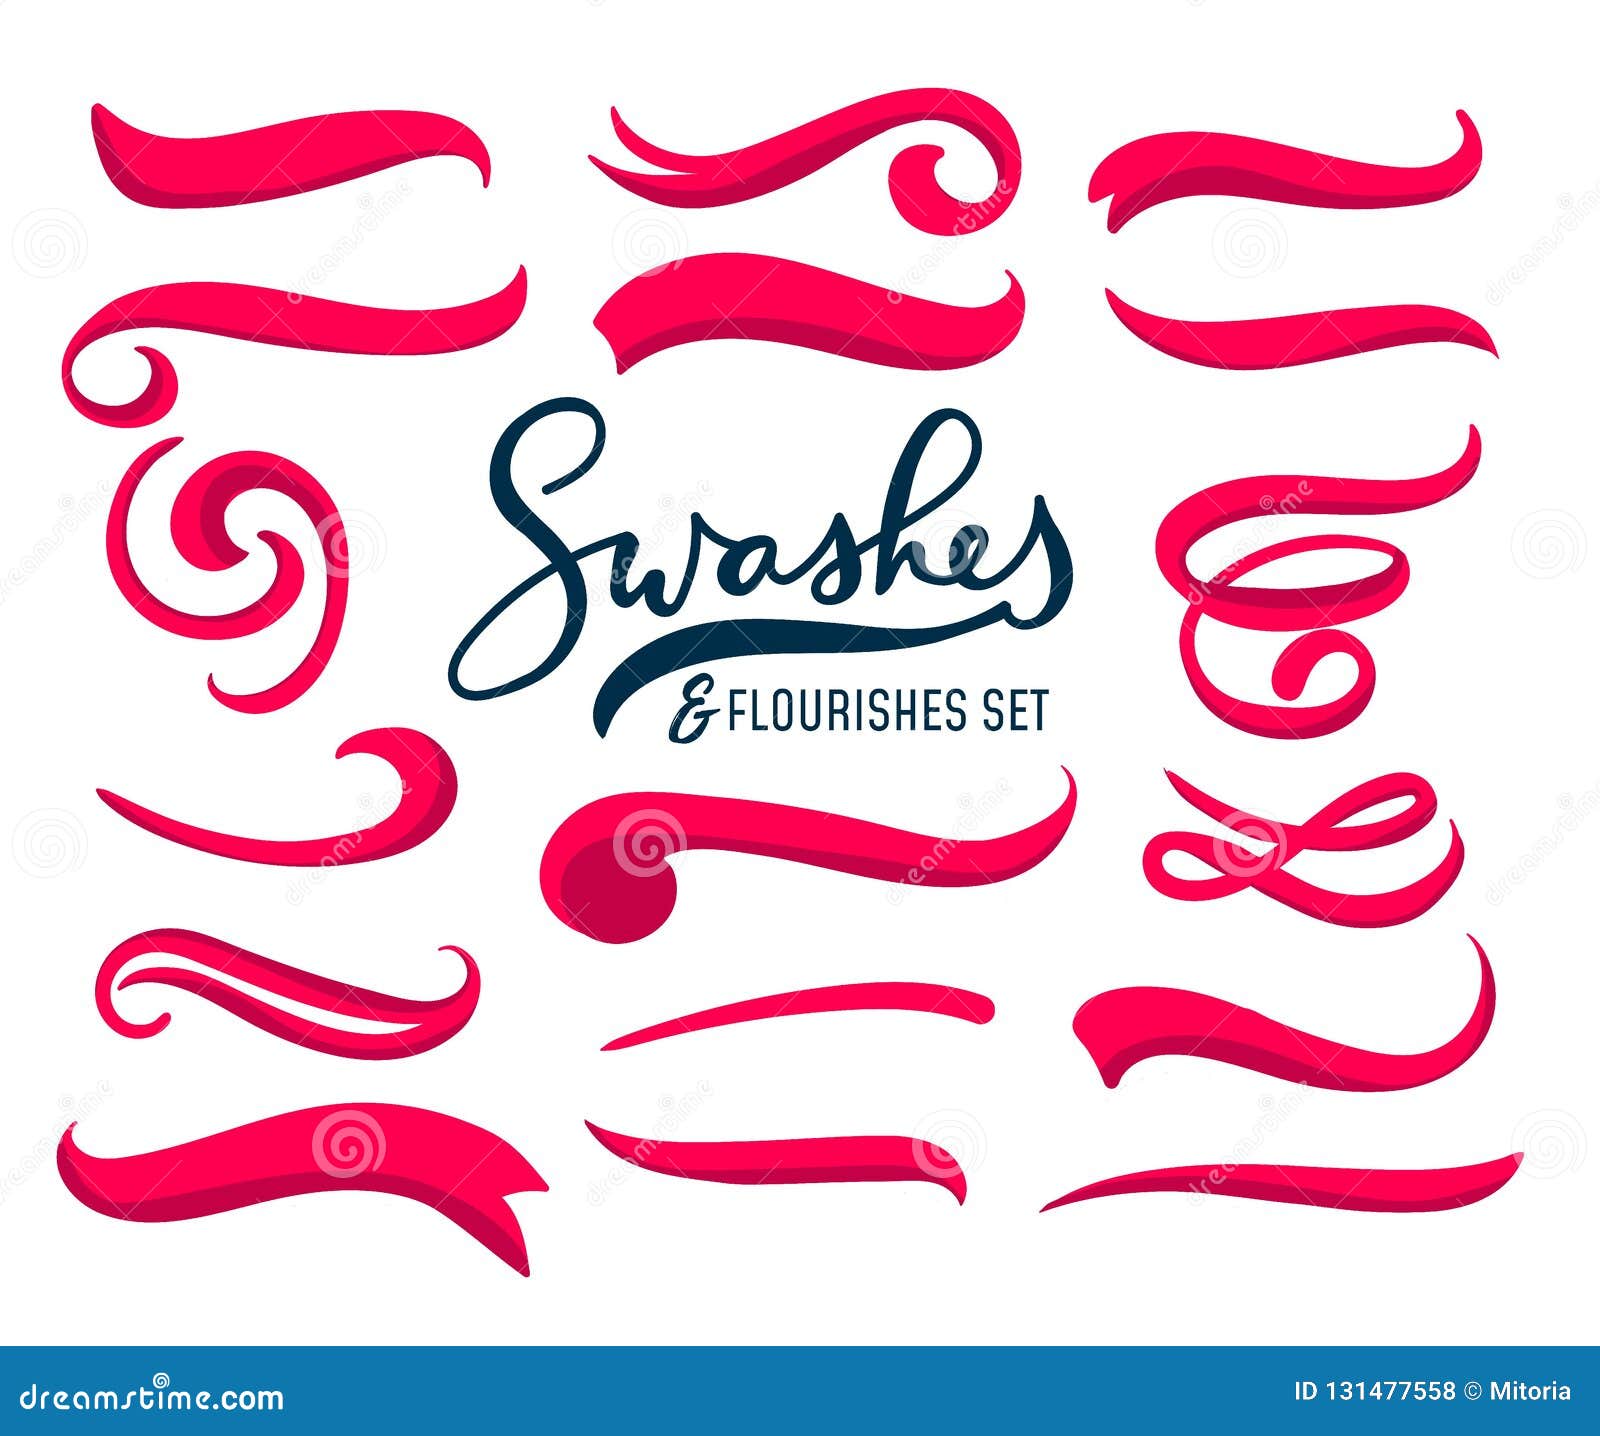 set of hand drawn red swashes and flourishes  on white background.  